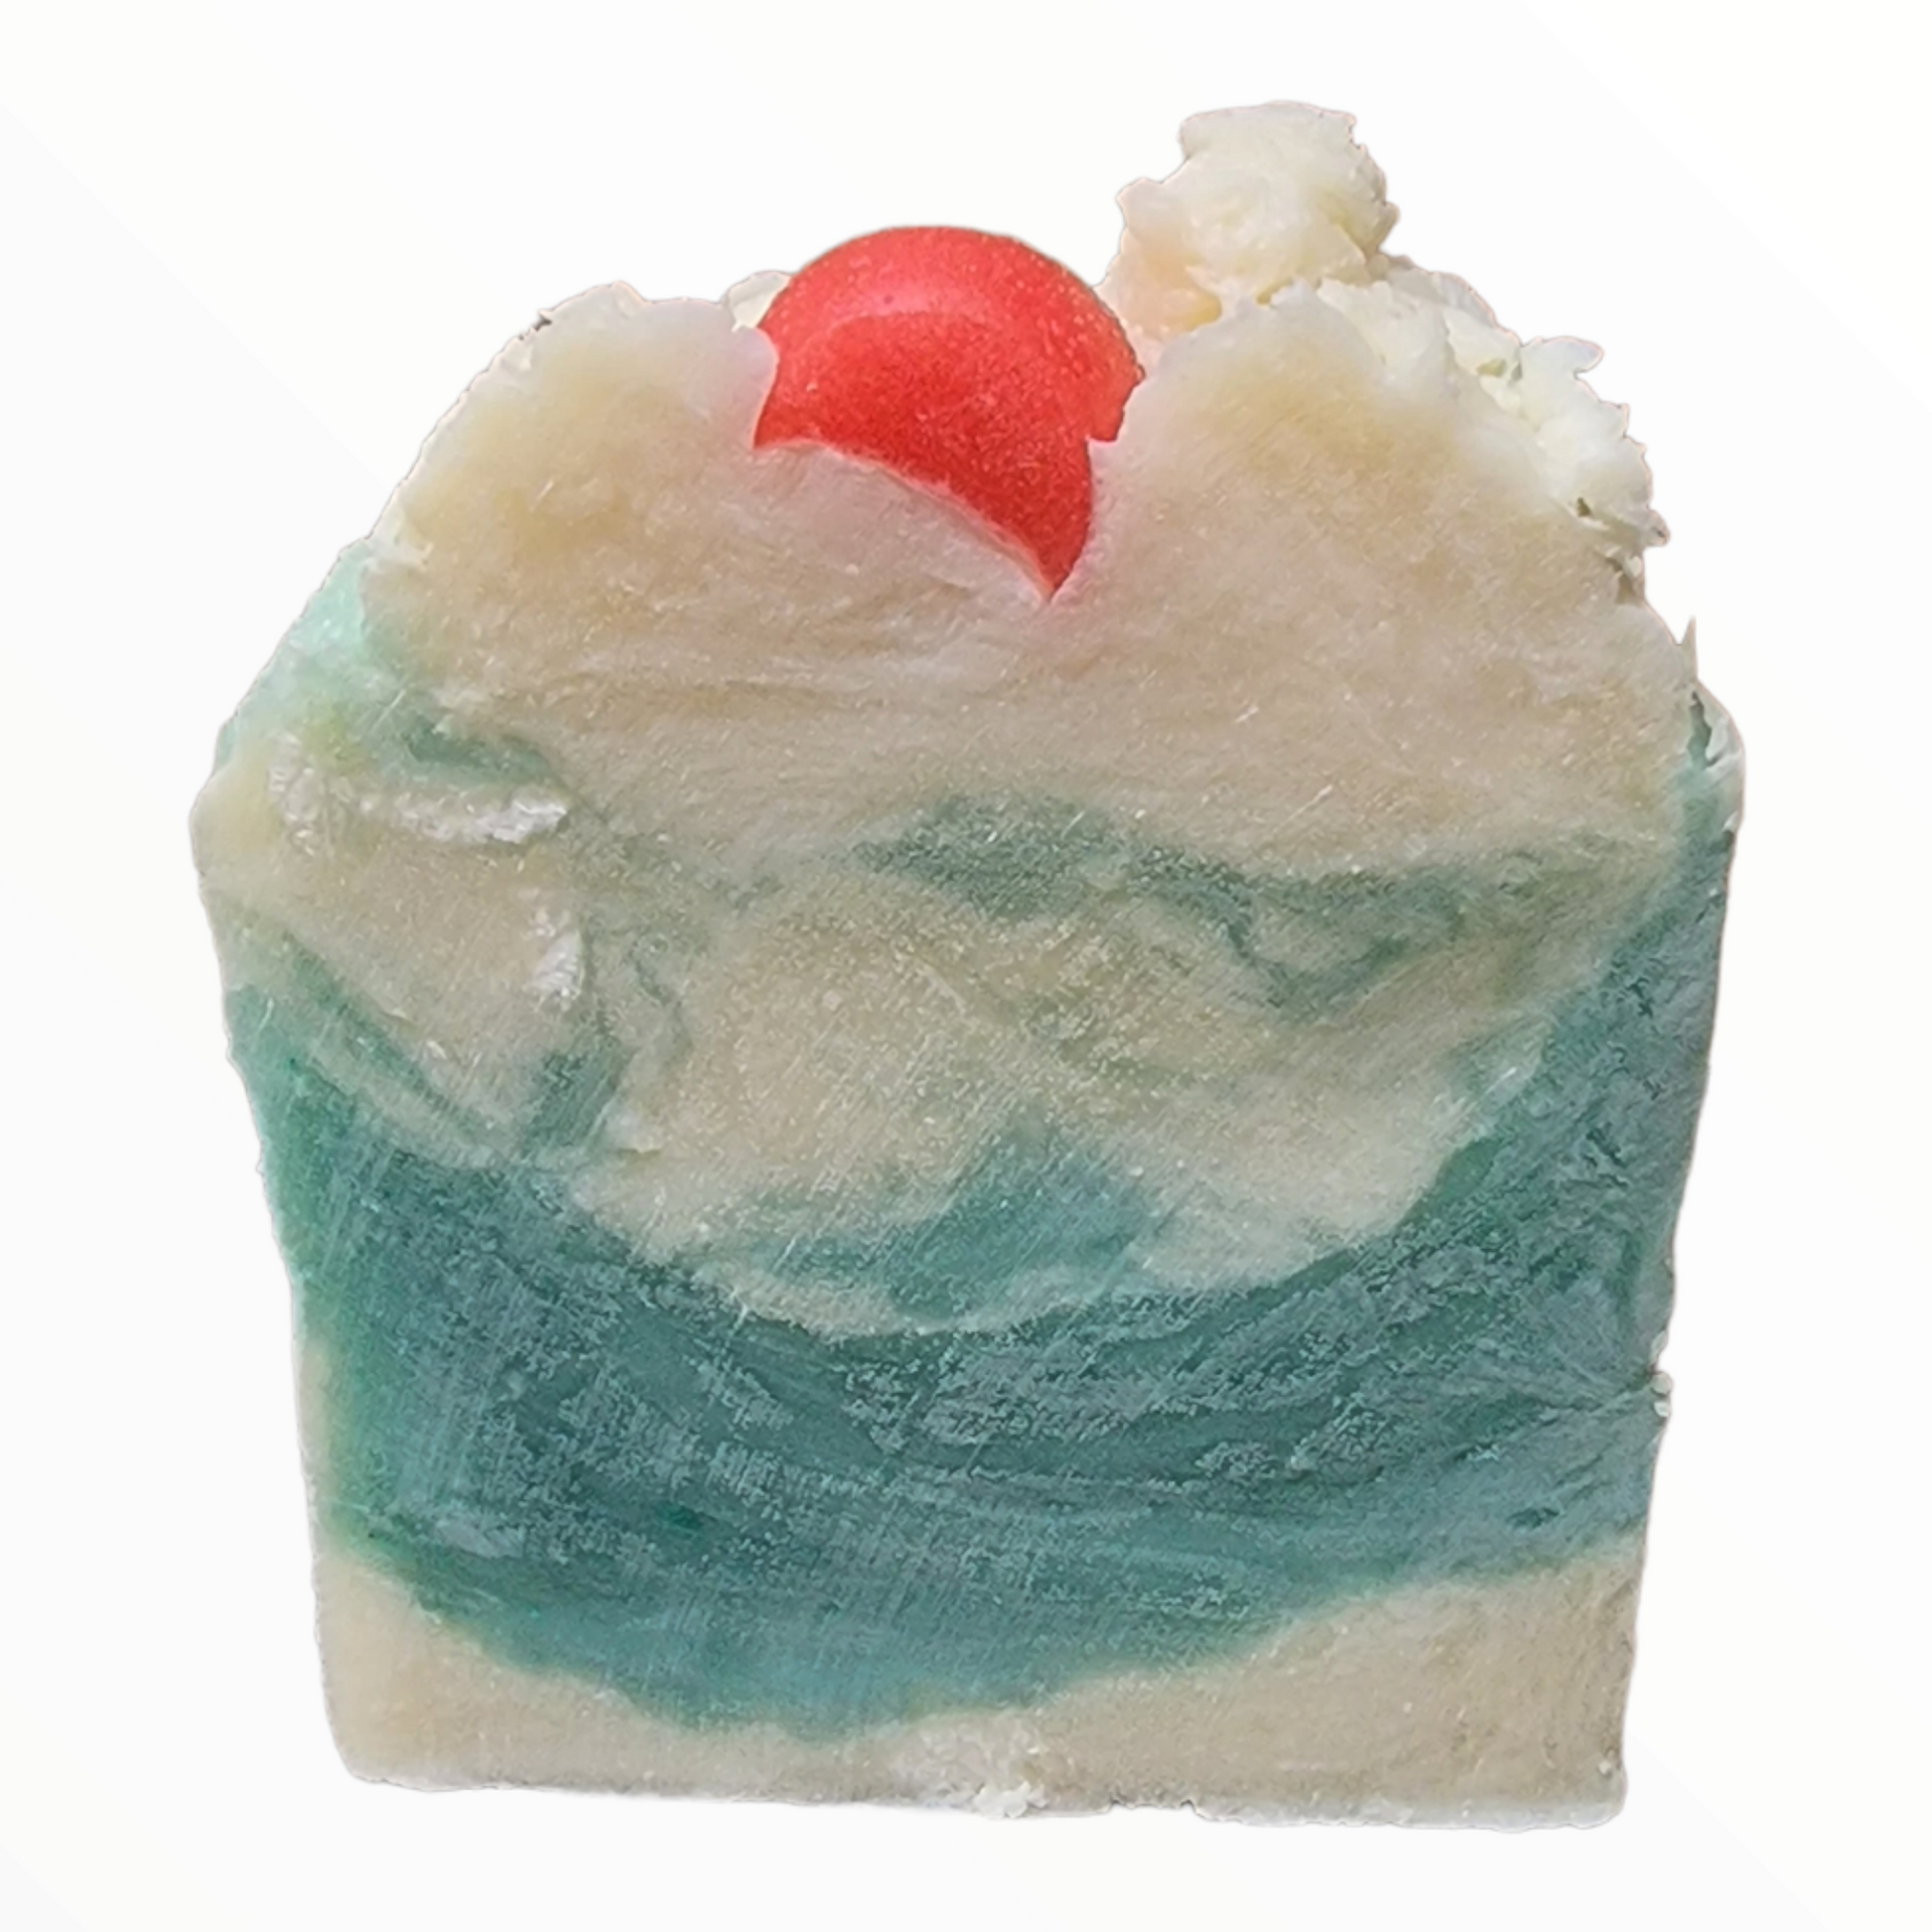 Cypress Berry Christmas Soap - Stacy's Soap Suds